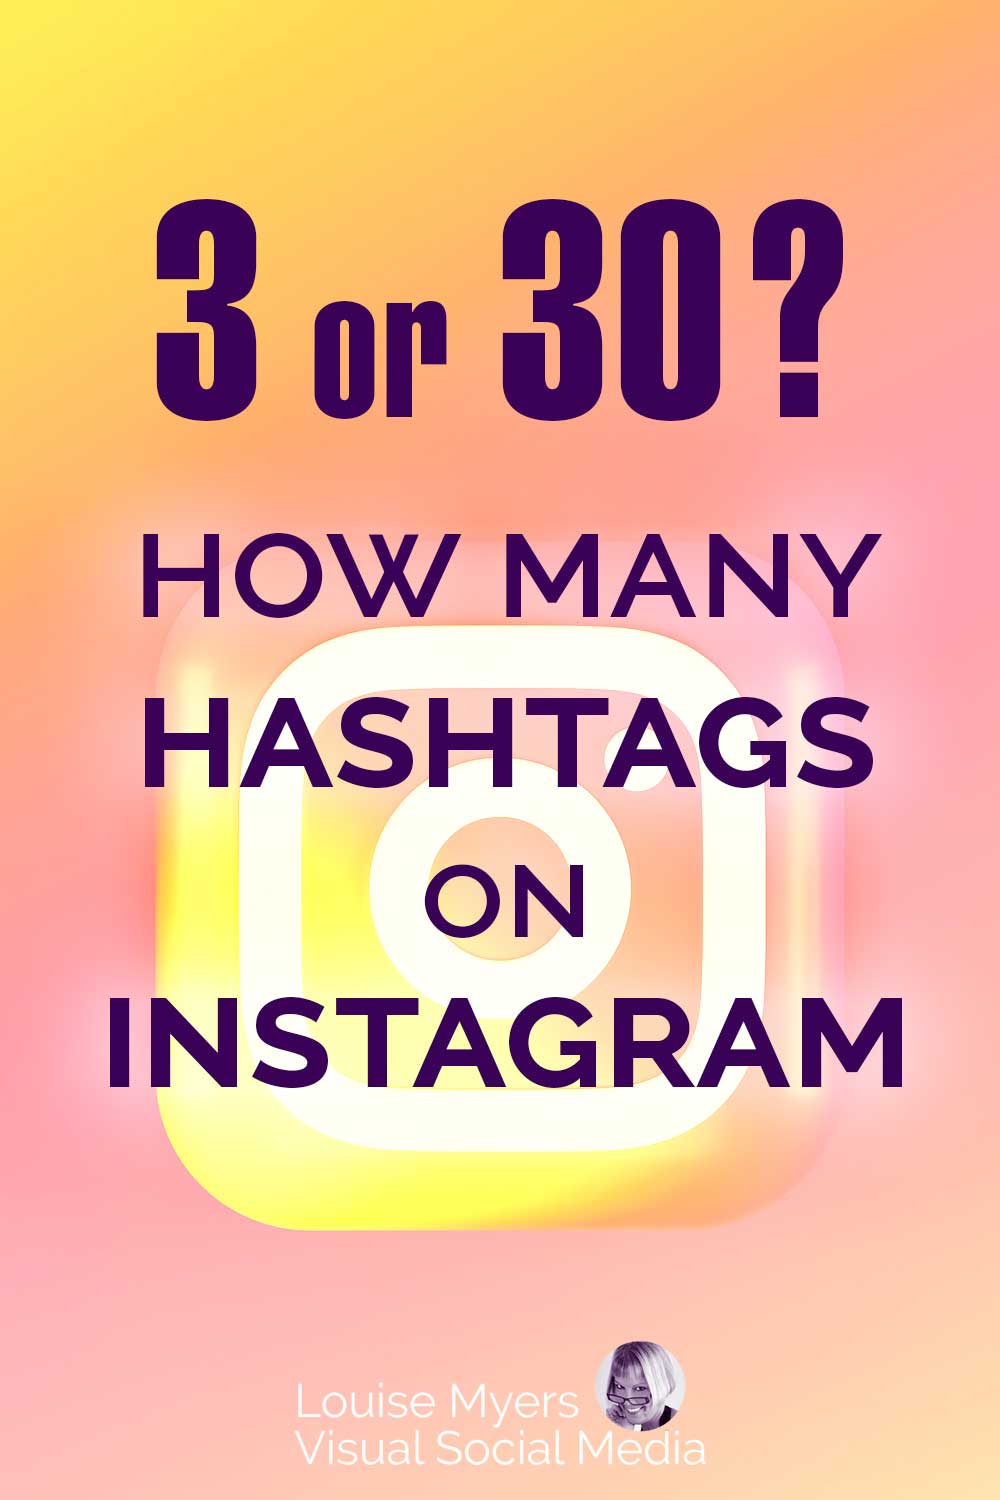 pink and yellow Instagram logo says 3 or 30 how many hashtags on Instagram.